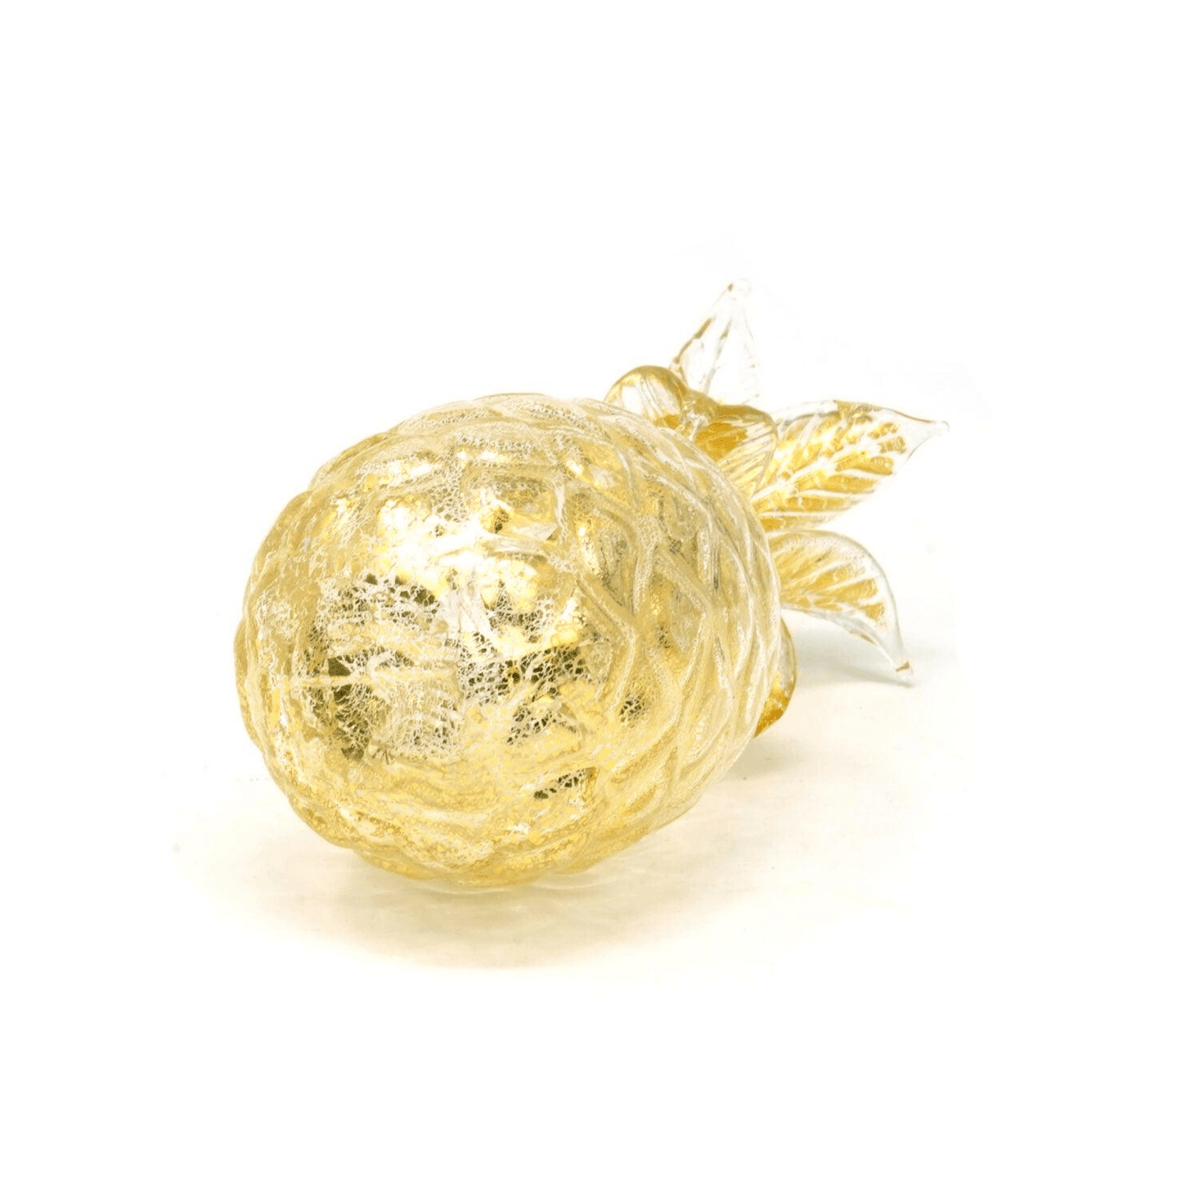 Murano Blown Glass Pineapple, Gold with 24k Gold Patina, Hand Blown in Italy at MyItalianDecor